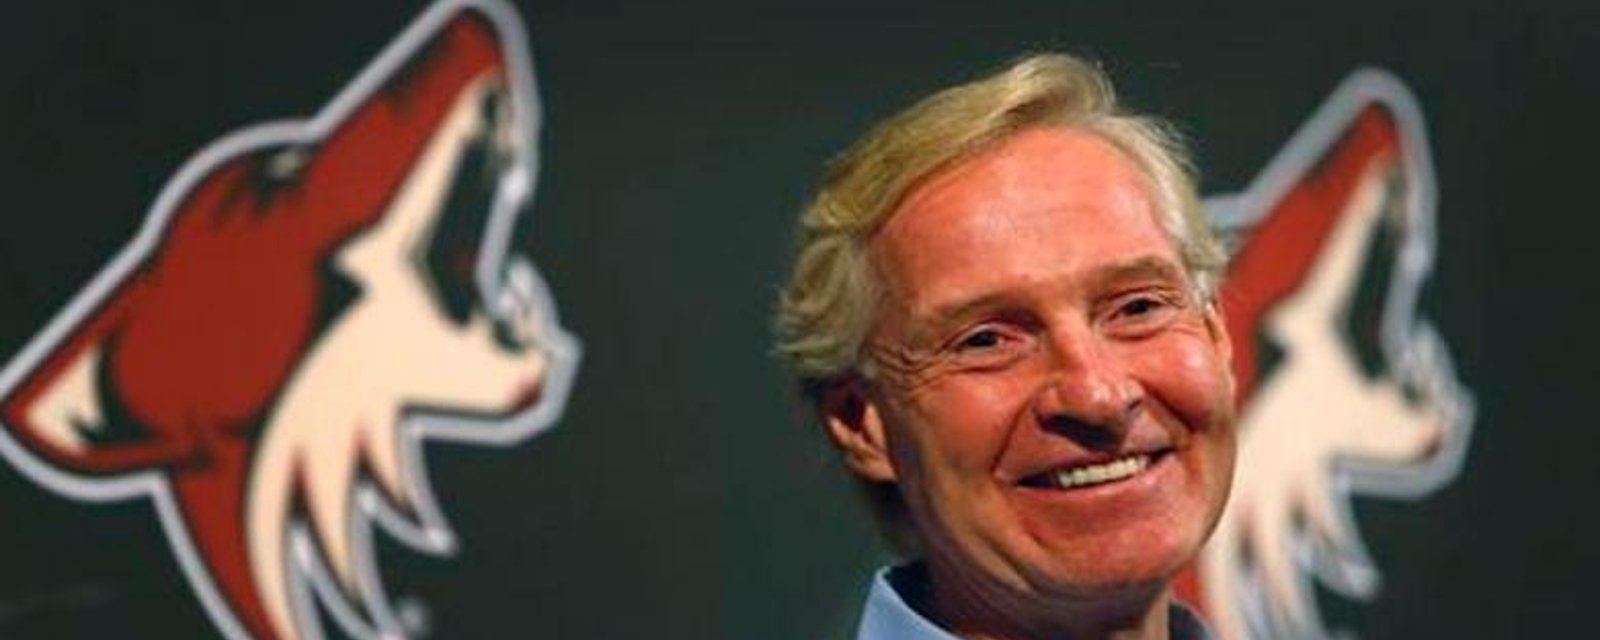 Coyotes' general manager Don Maloney reacts to conspiracy accusations.